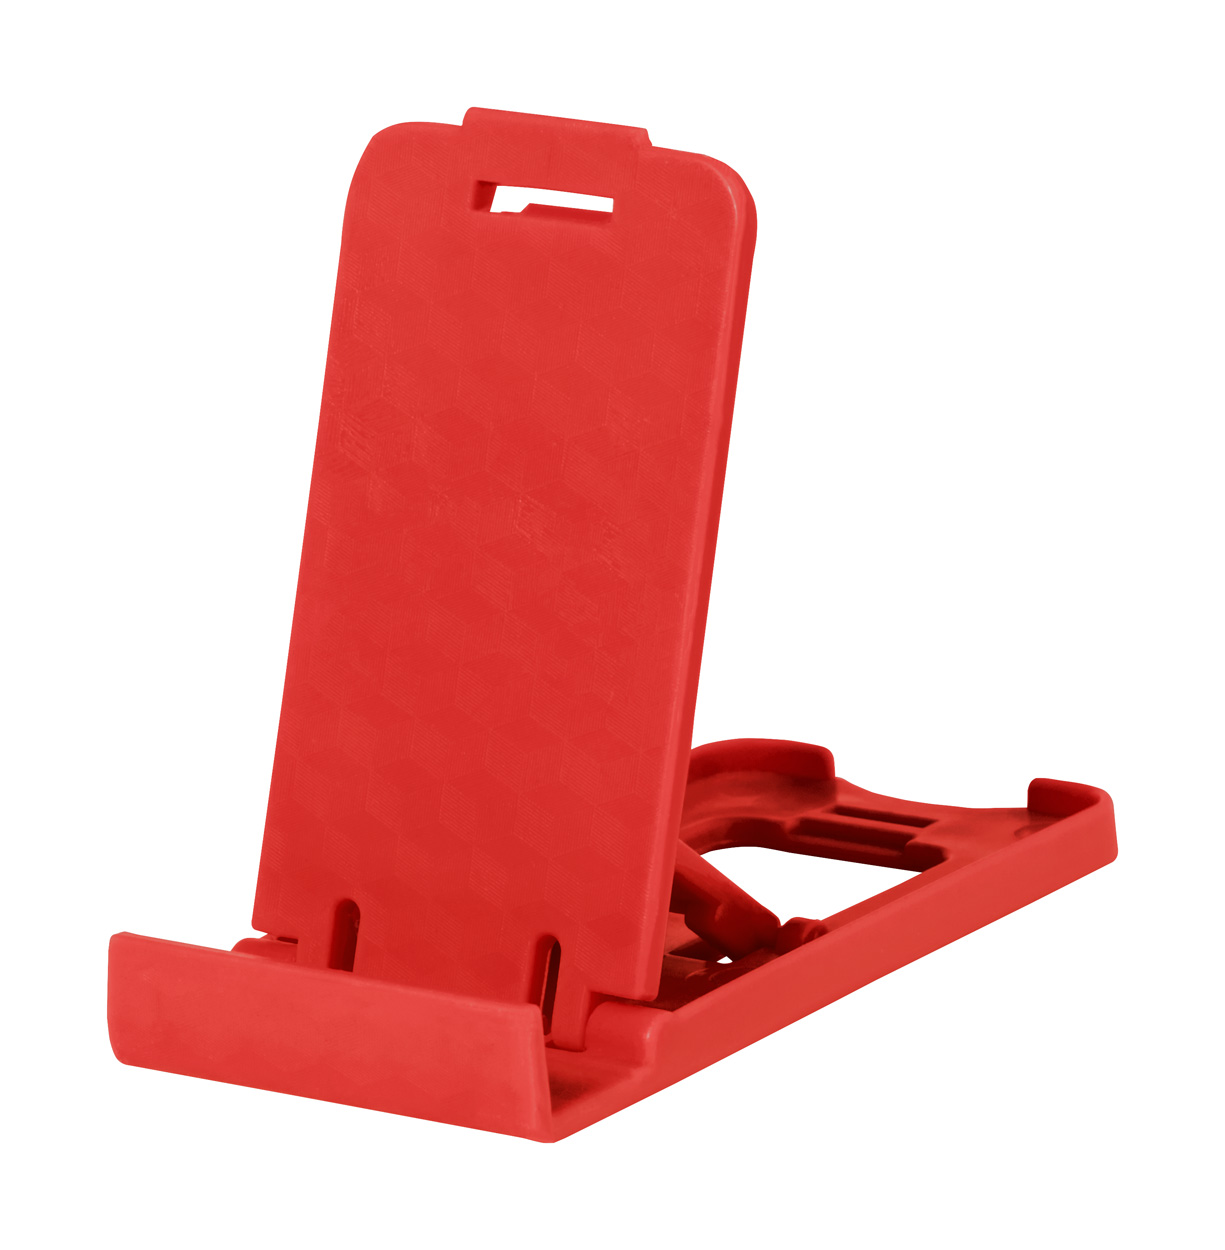 Asher mobile phone stand - red